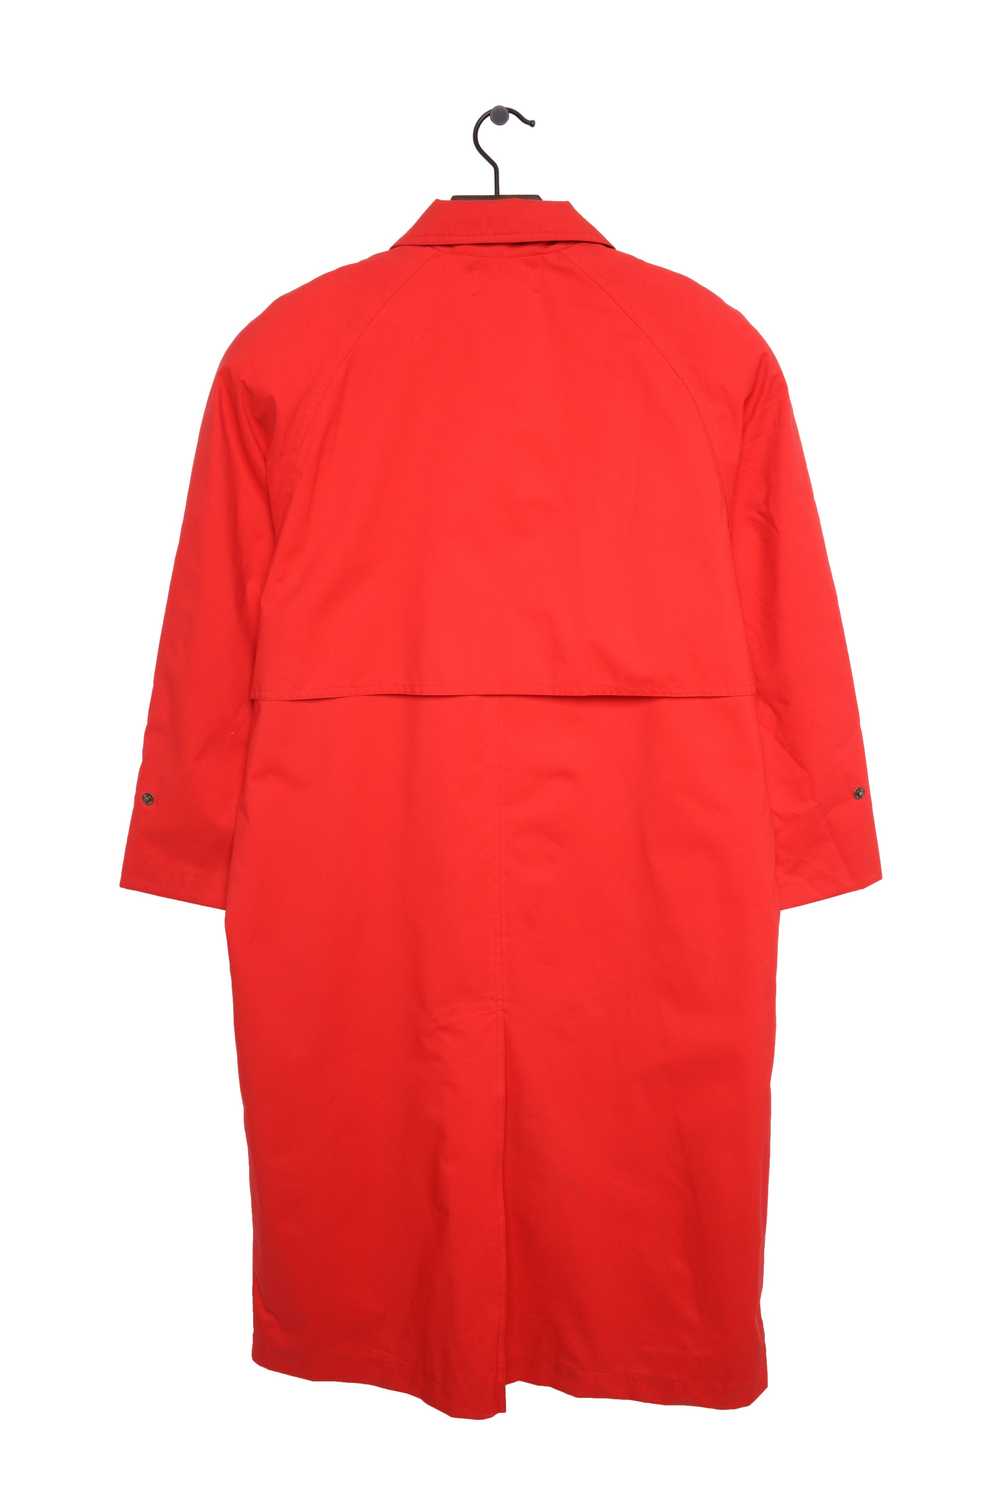 Cherry Red Trench Coat - image 2